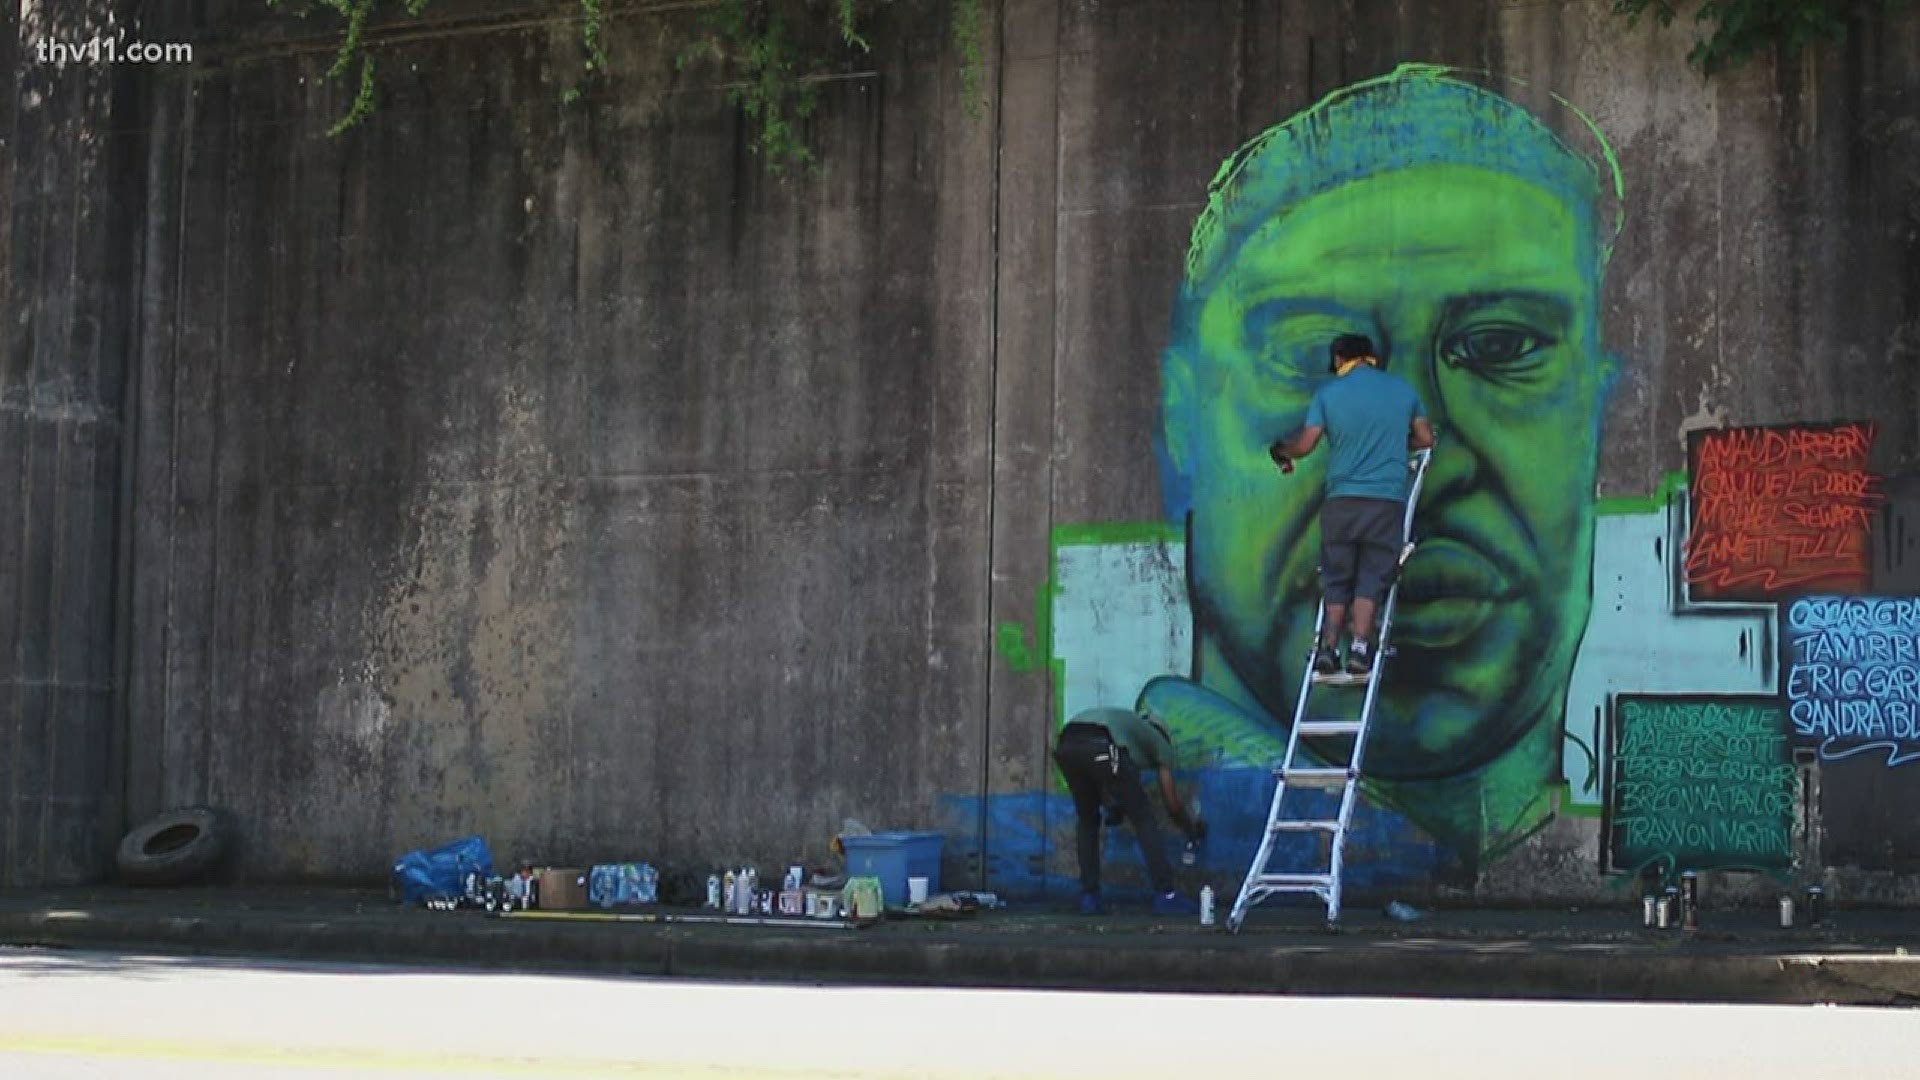 Two artists created a mural in dedications to George Floyd and other African Americans who lost their lives to police brutality. They hope to raise awareness.